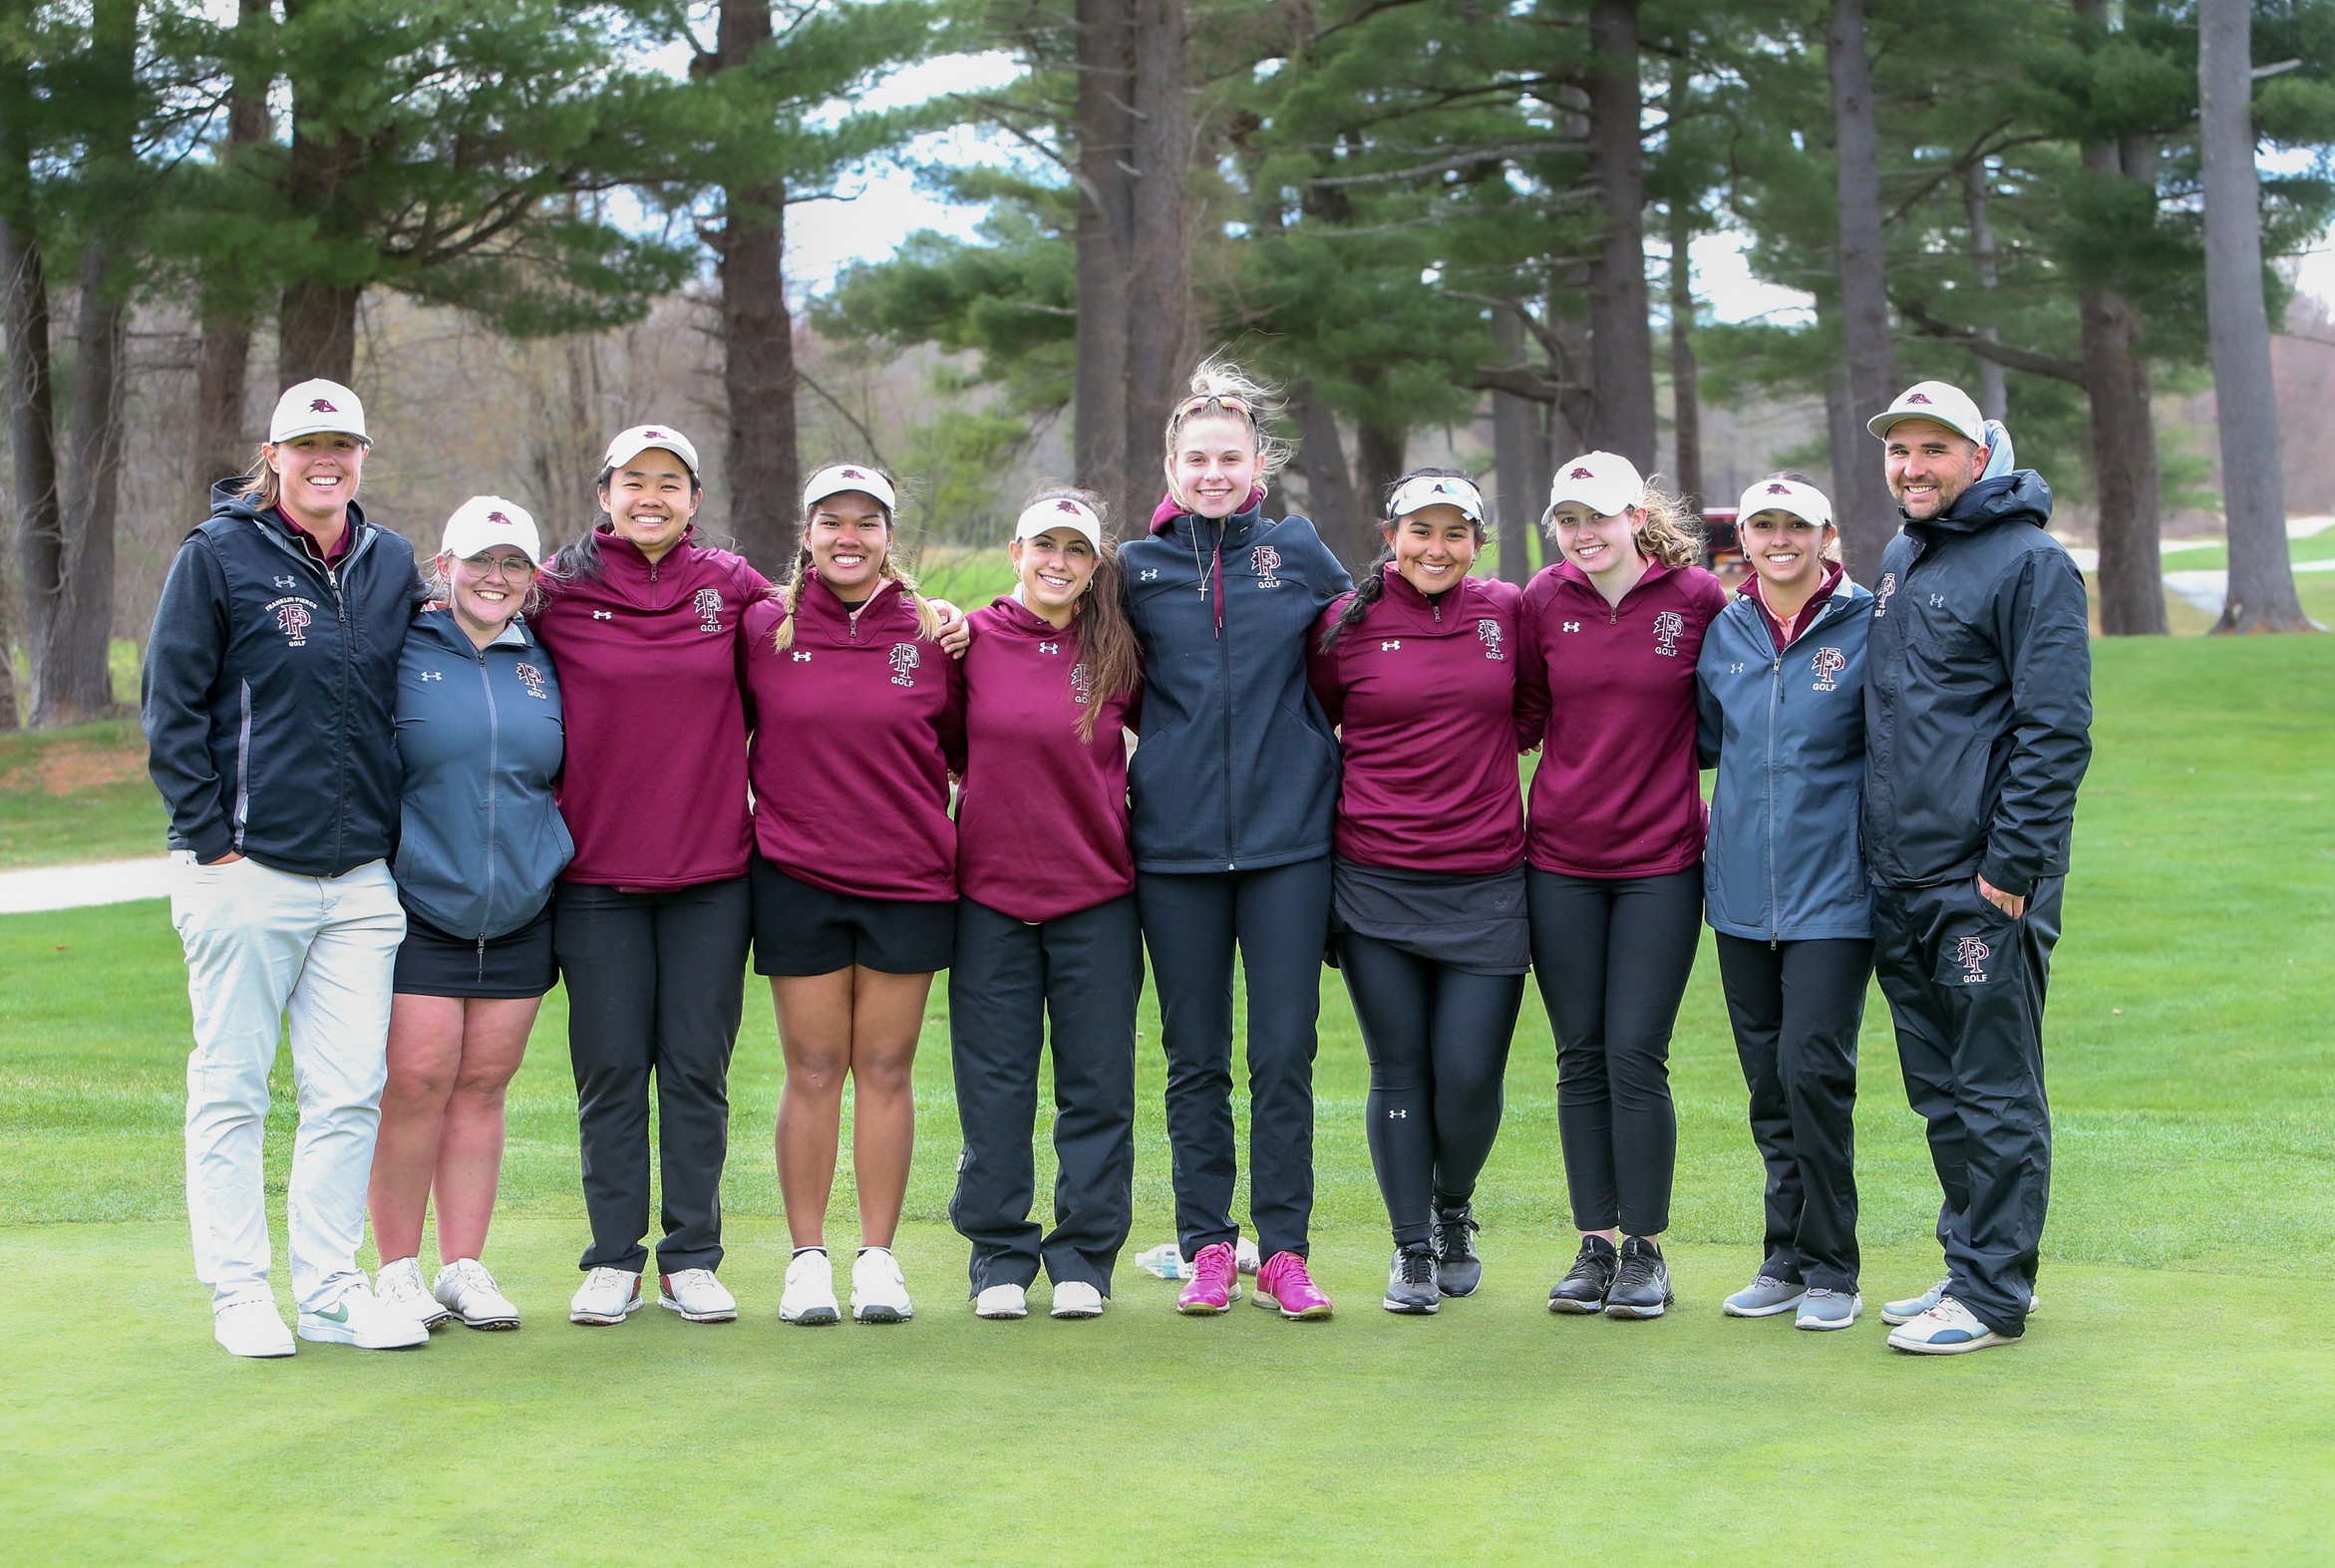 Women's Golf Tops the Leaderboards at Saint Anselm College Hawk Invitational